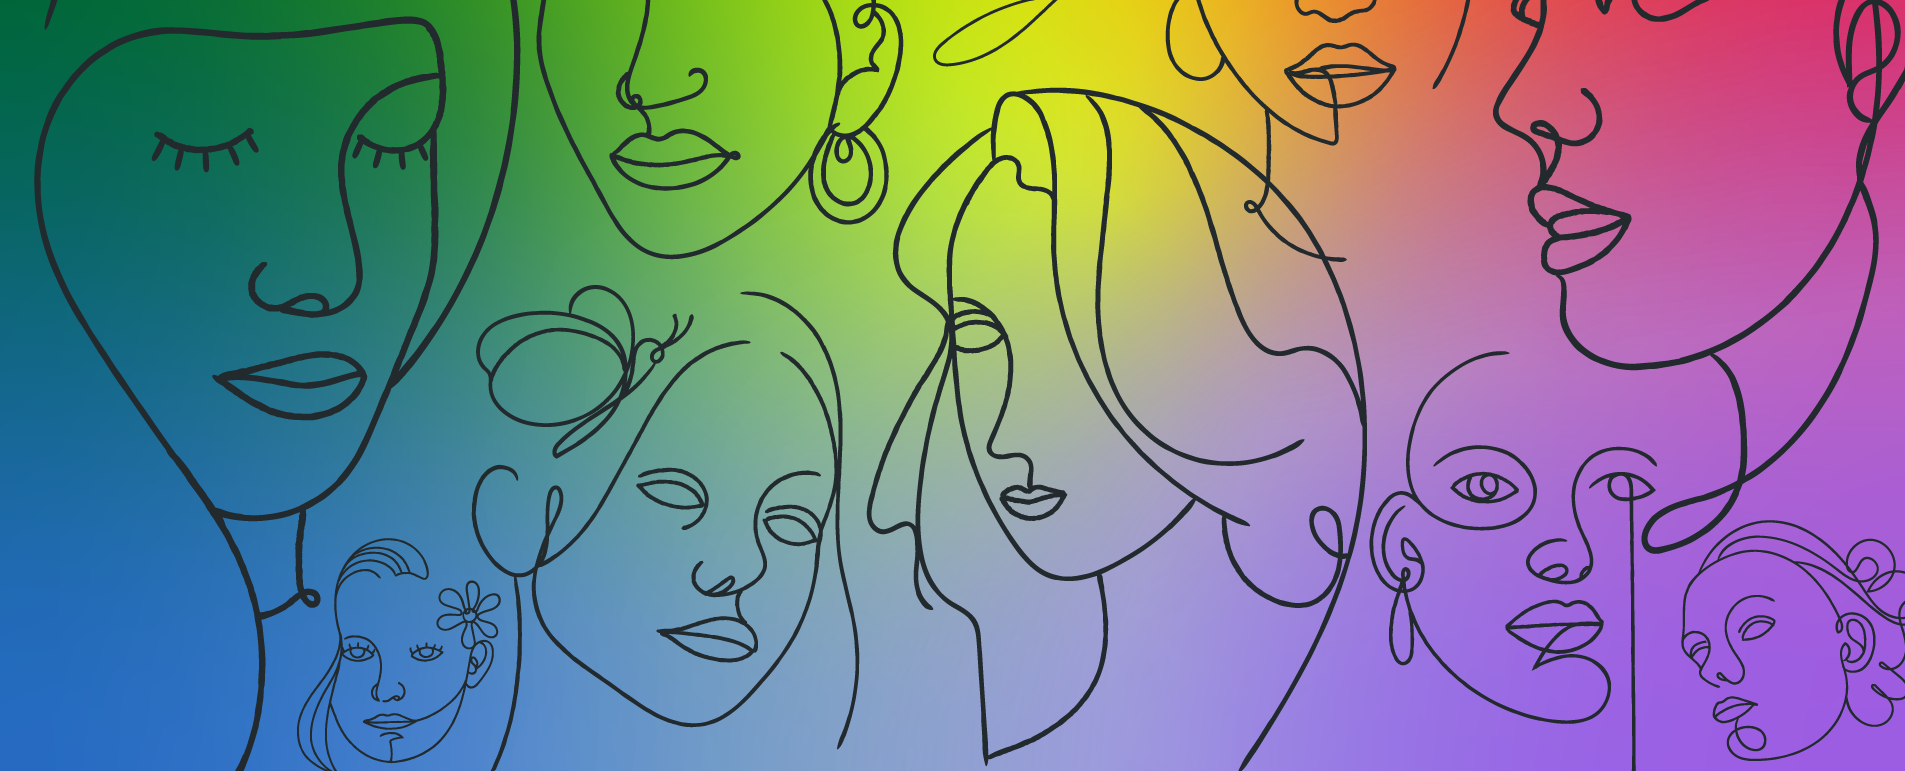 Stencil style illustration showing the outline of multiple women on a rainbow background